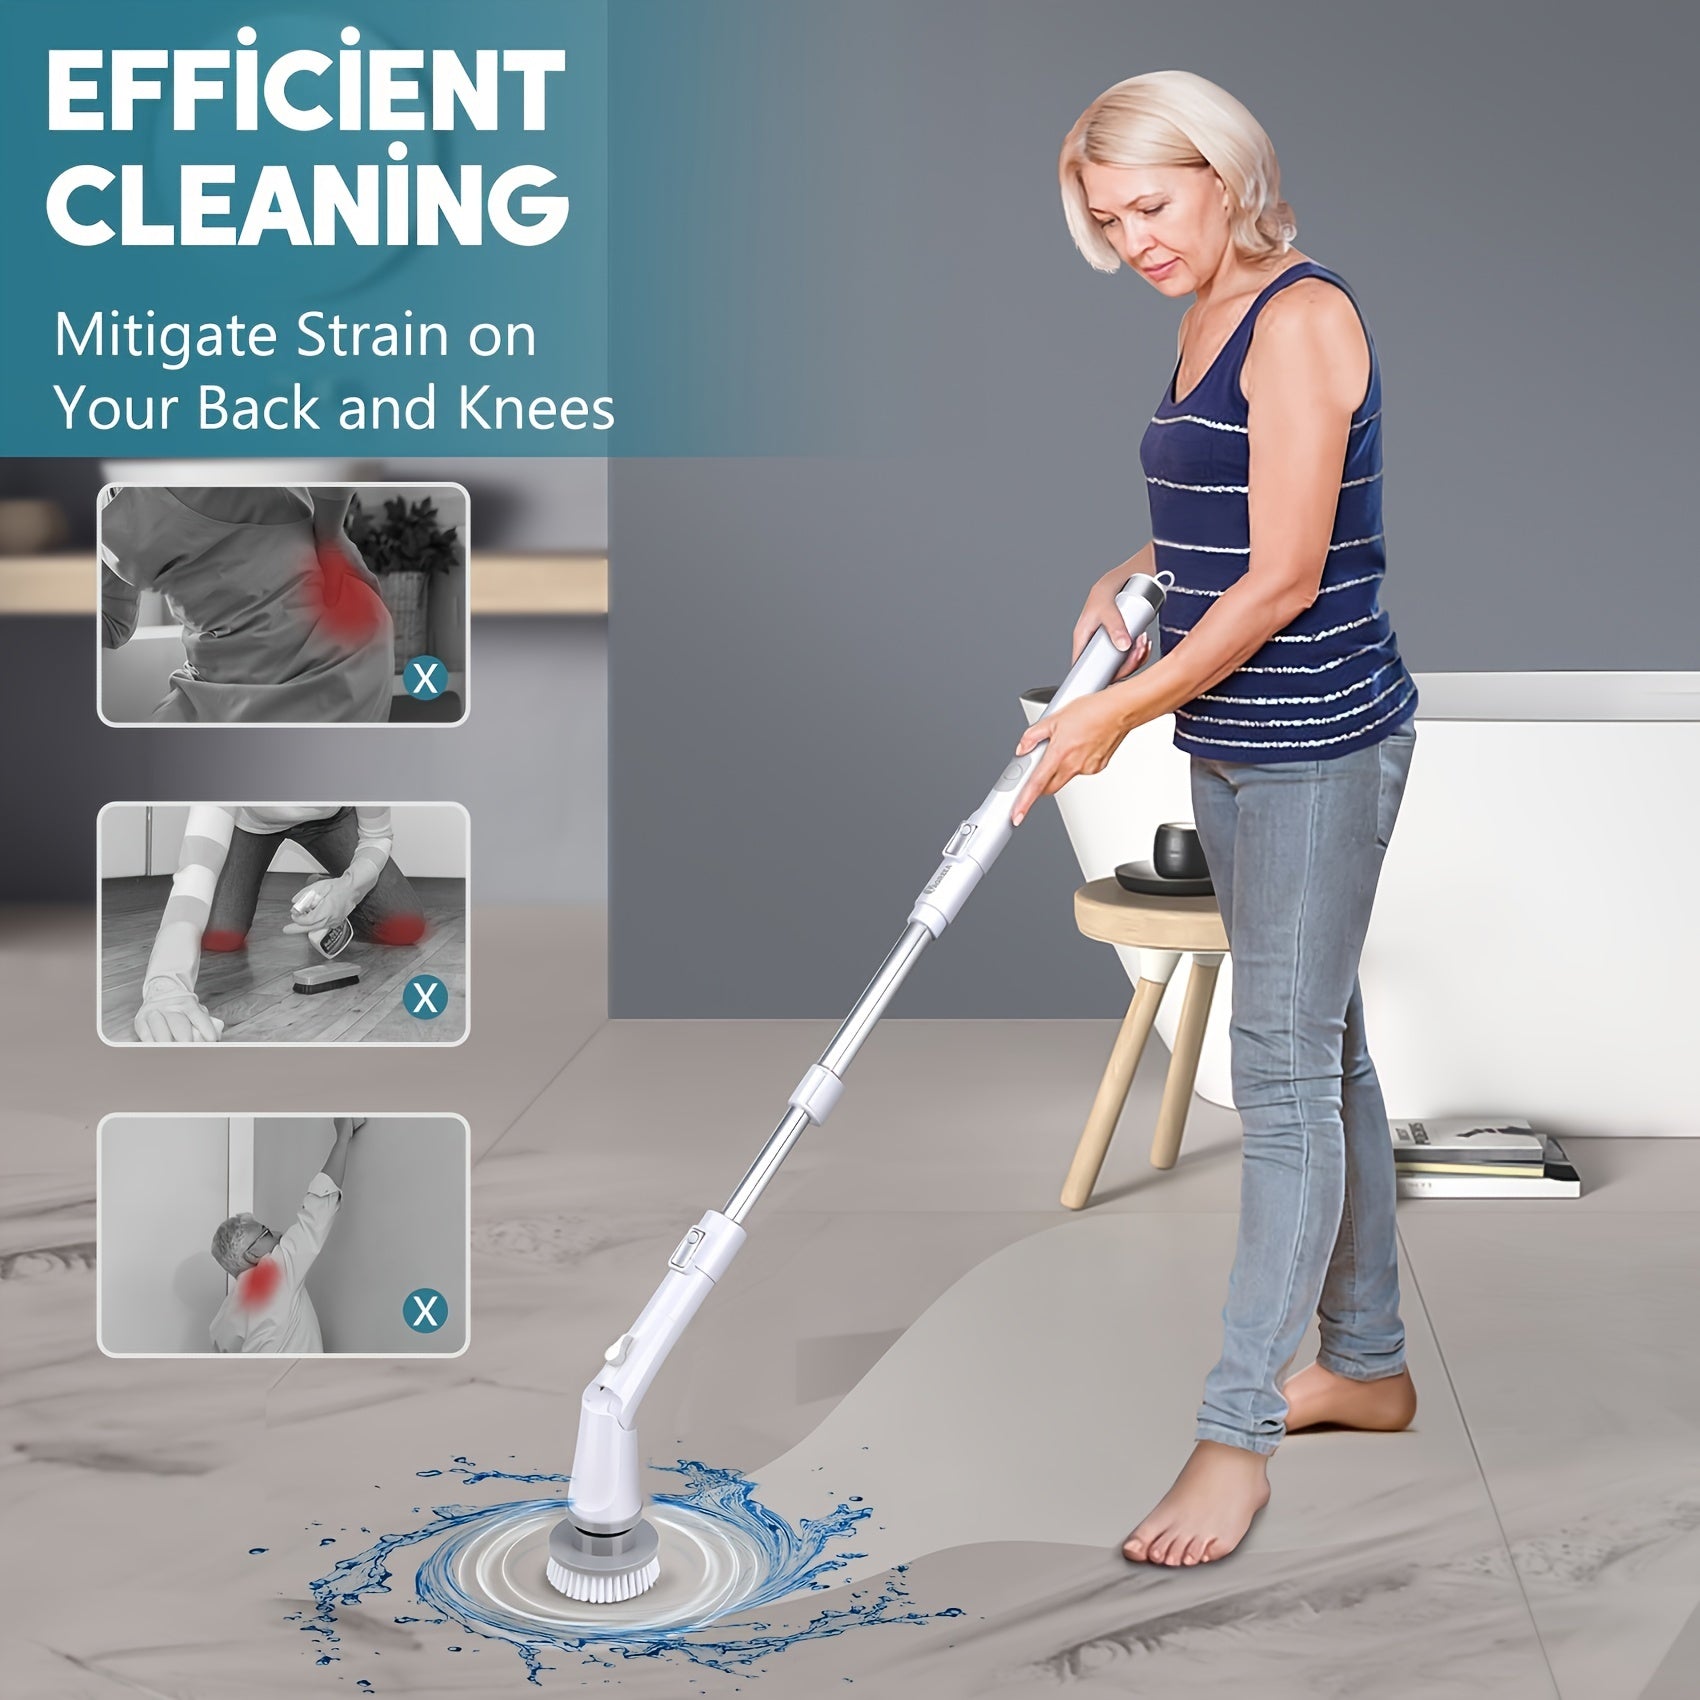 VENETIO 1 set Cordless Electric Spin Scrubber with 4 Replaceable Brush Heads - Long Handled Shower Scrubber for Tub Tile Cleaning - 90 Min Run Time - 320/420RPM - USB-C Charging Cord - Powerful Bathroom Cleaning Tool ➡ CS-00022